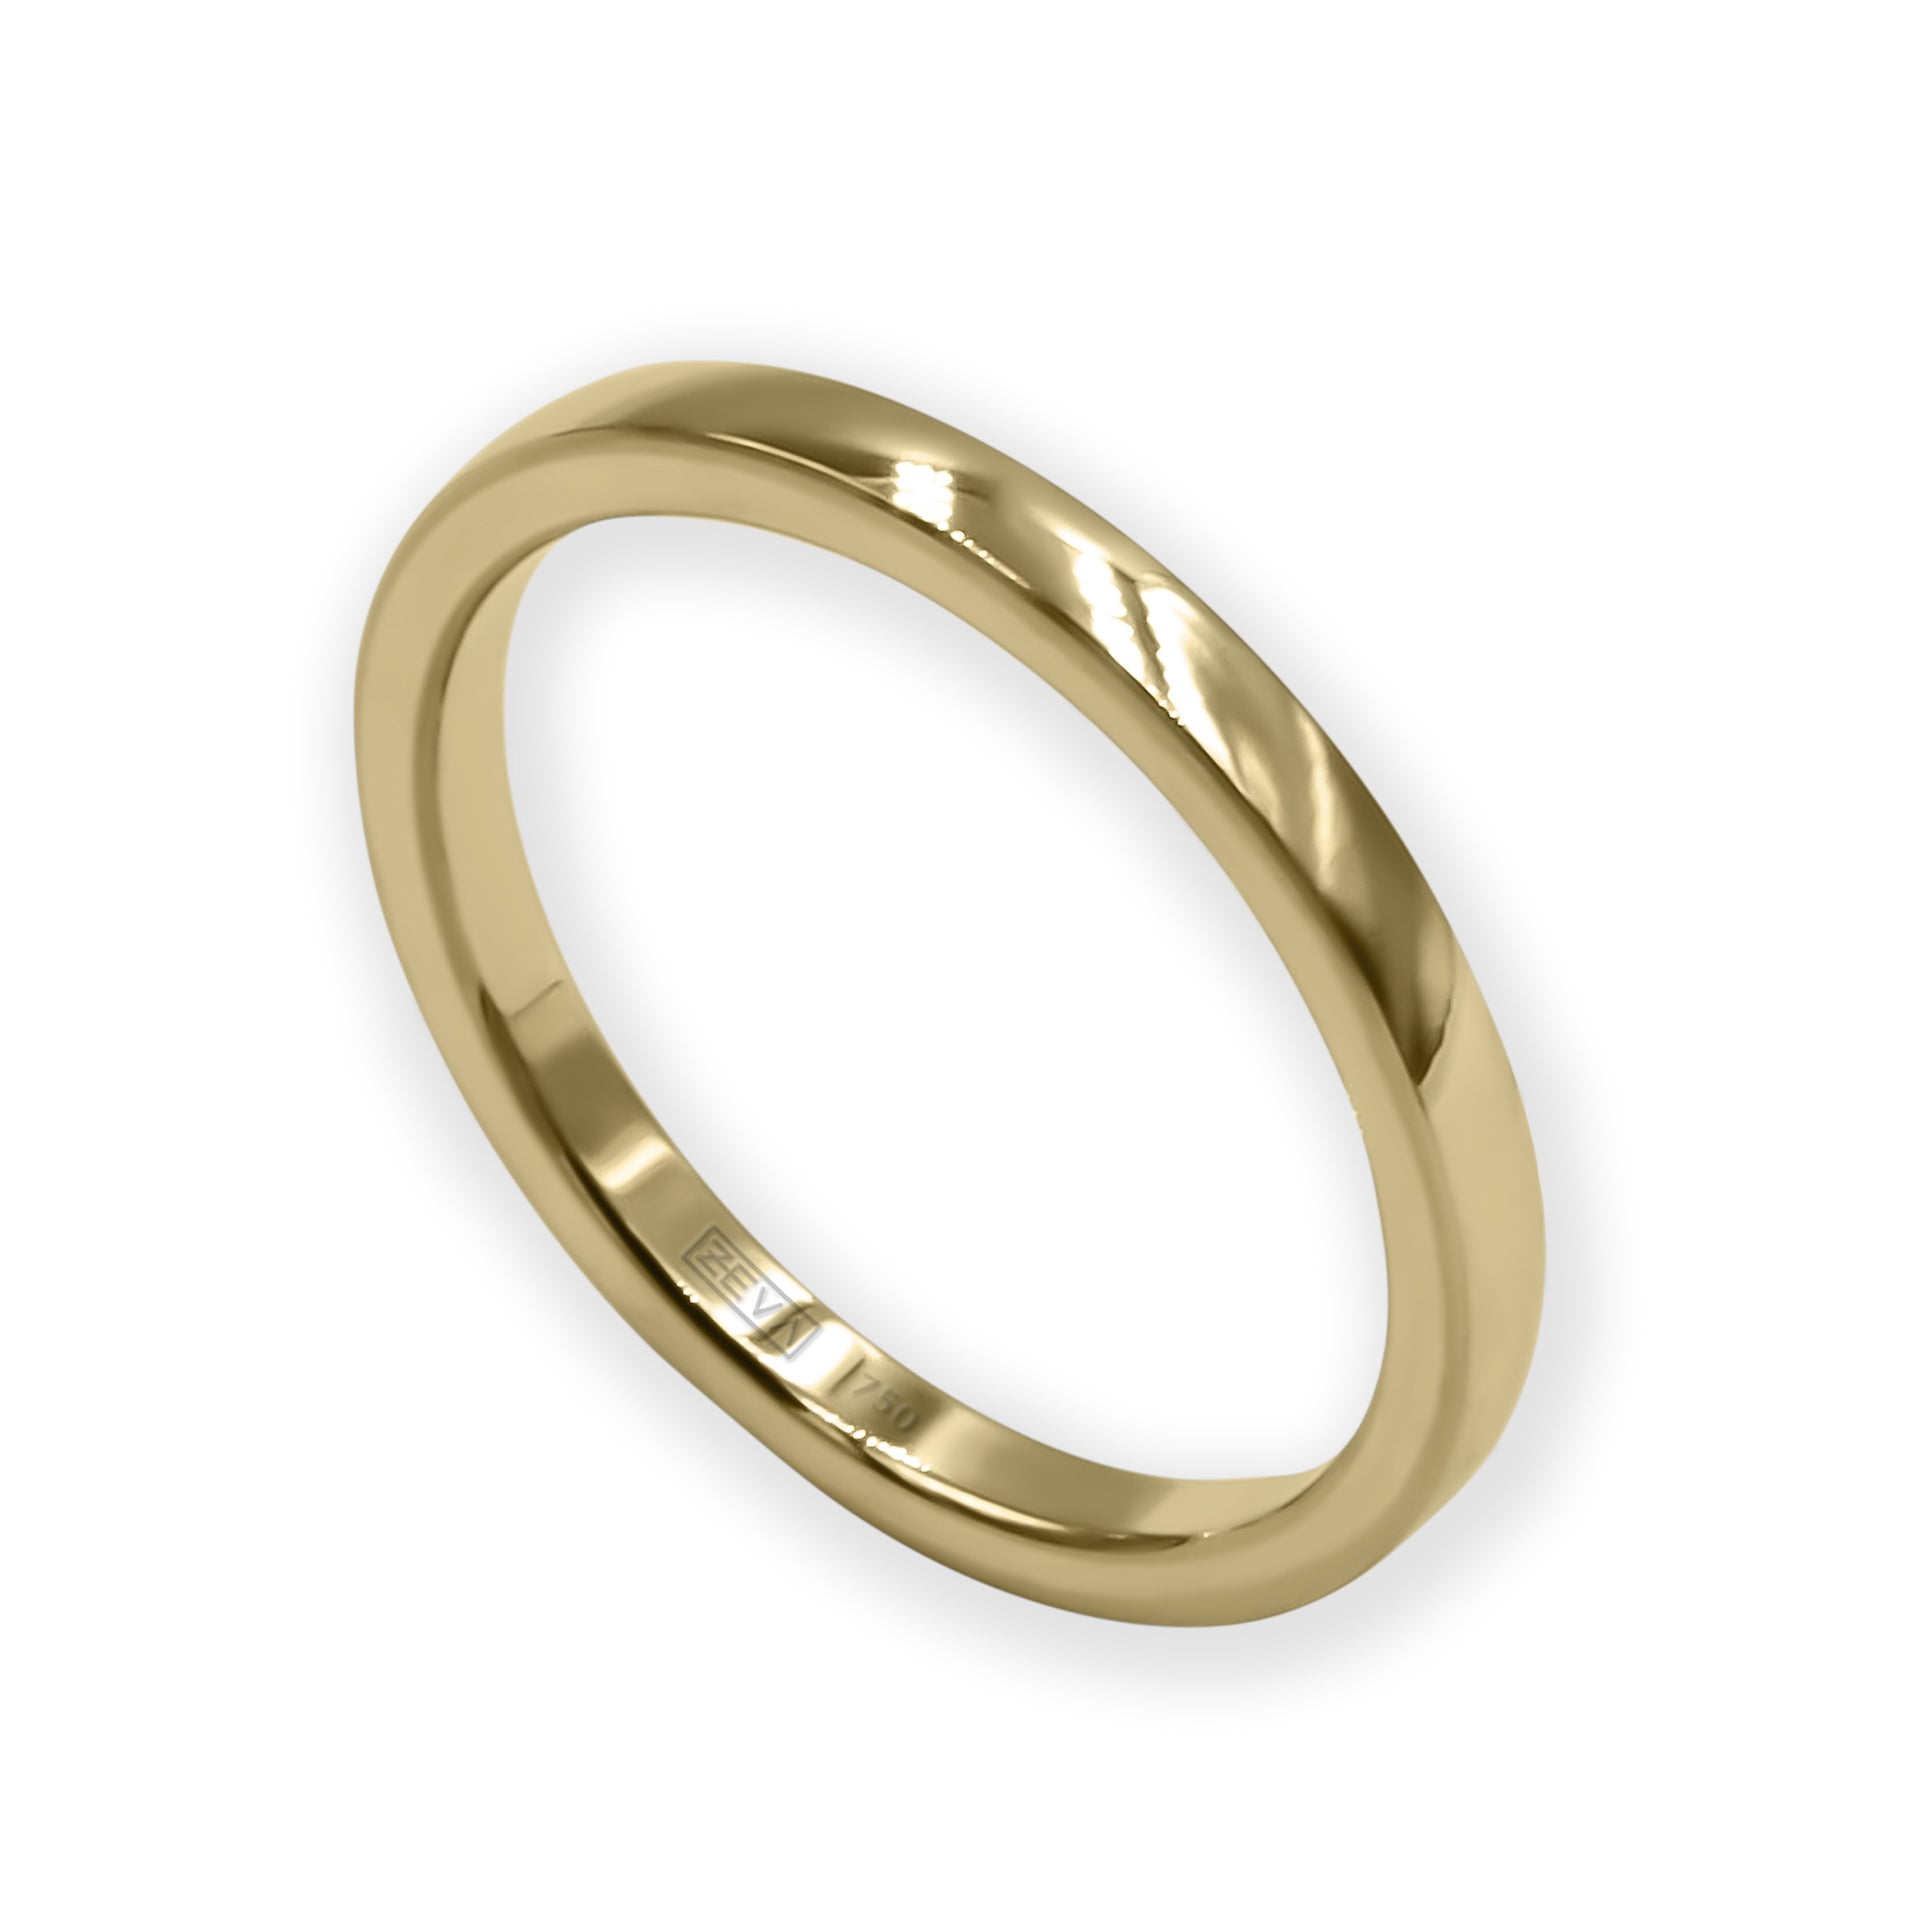 Ring EARTH IS ROUND 2mm round profile yellow gold 18k